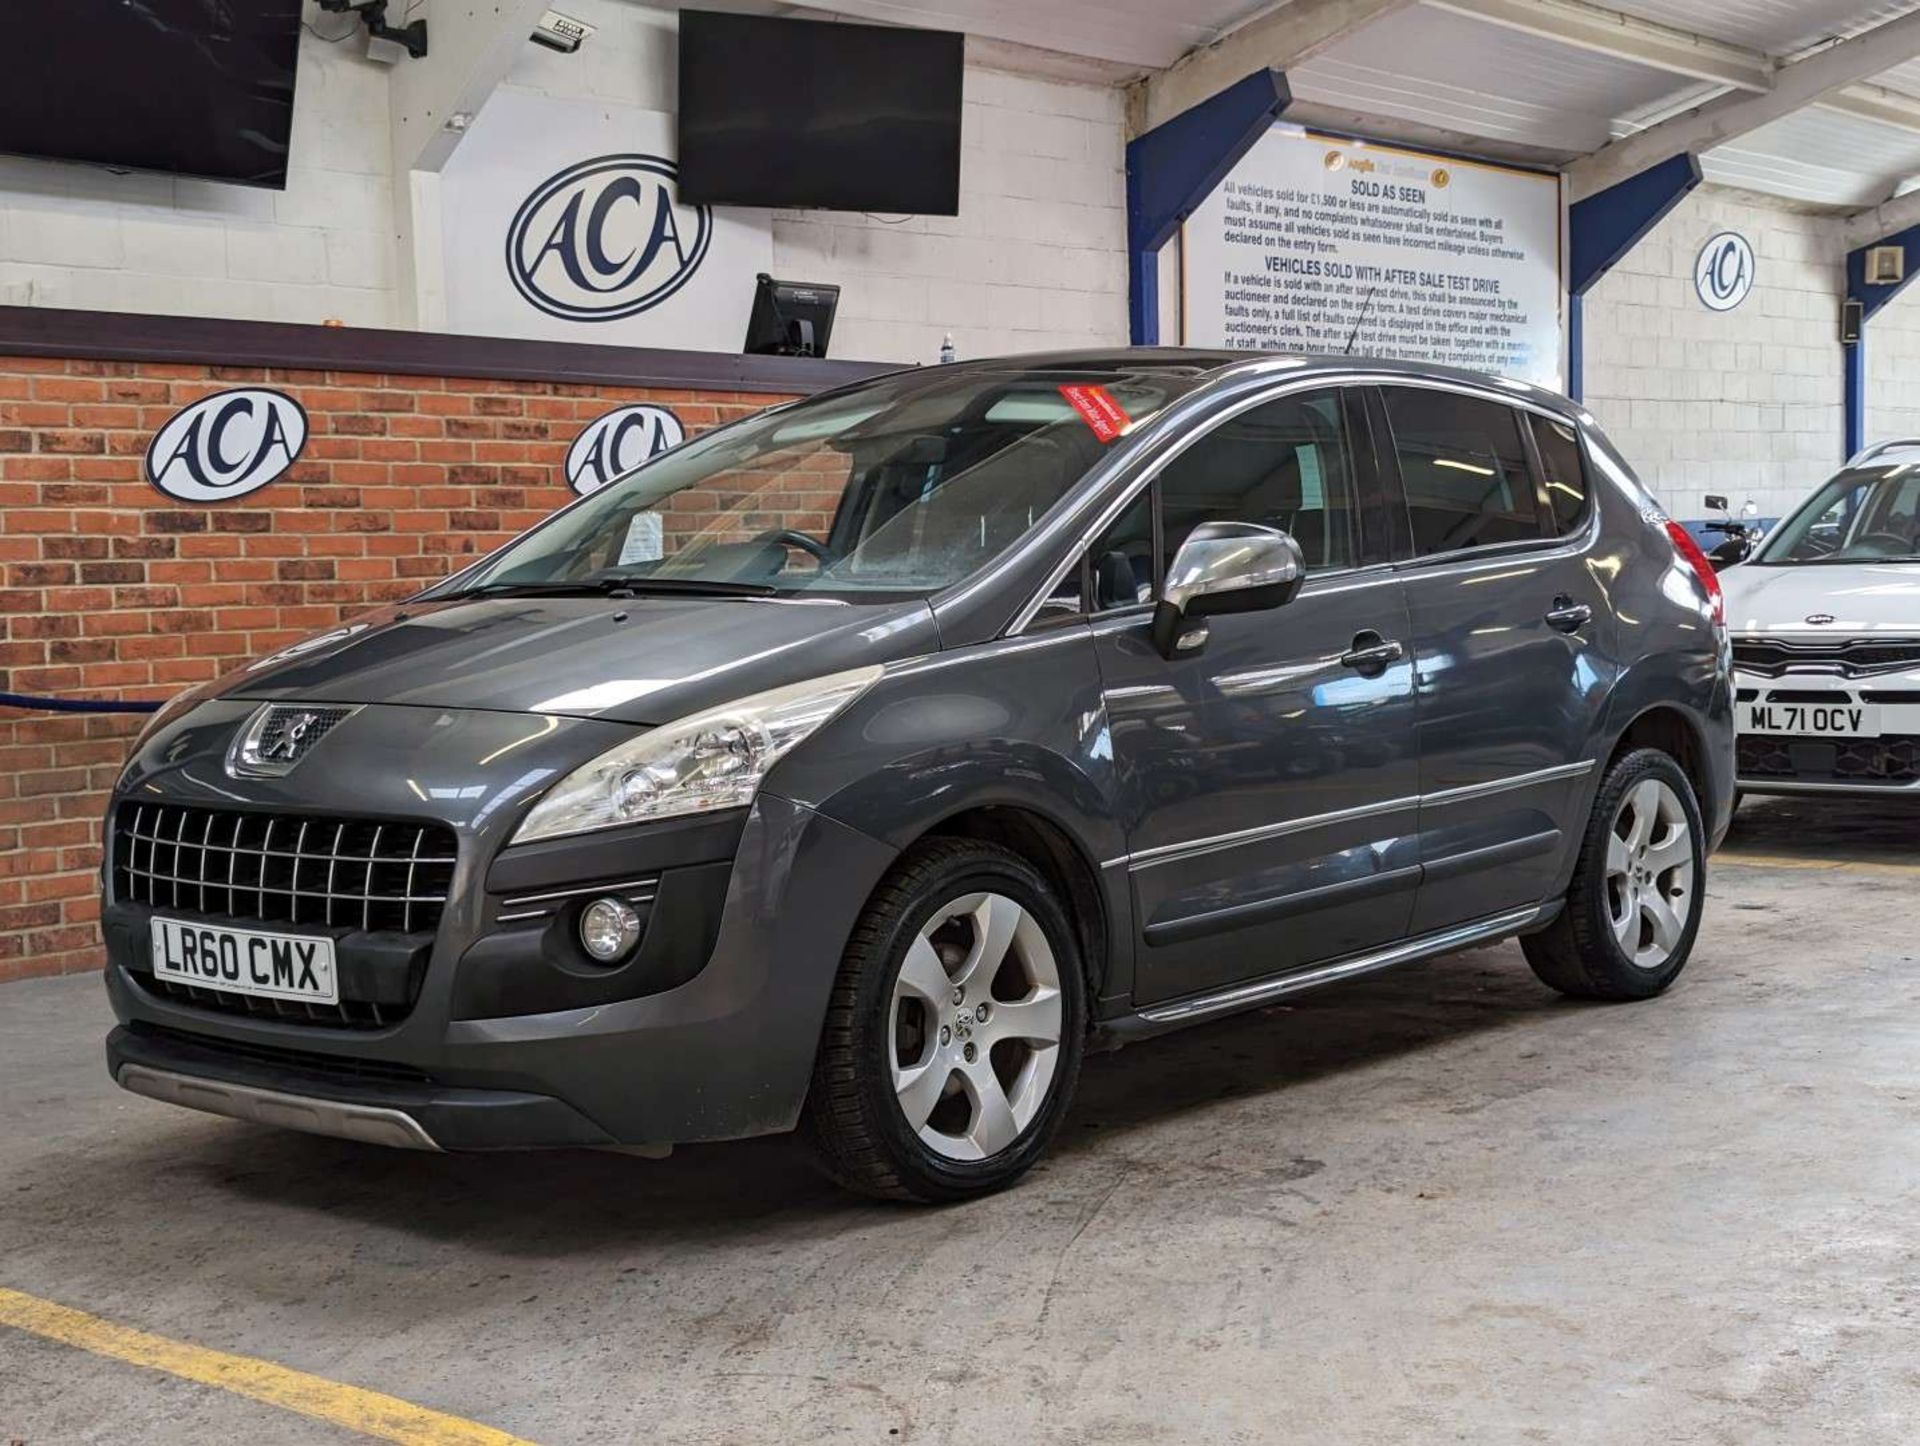 2010 PEUGEOT 3008 EXCLUSIVE HDI